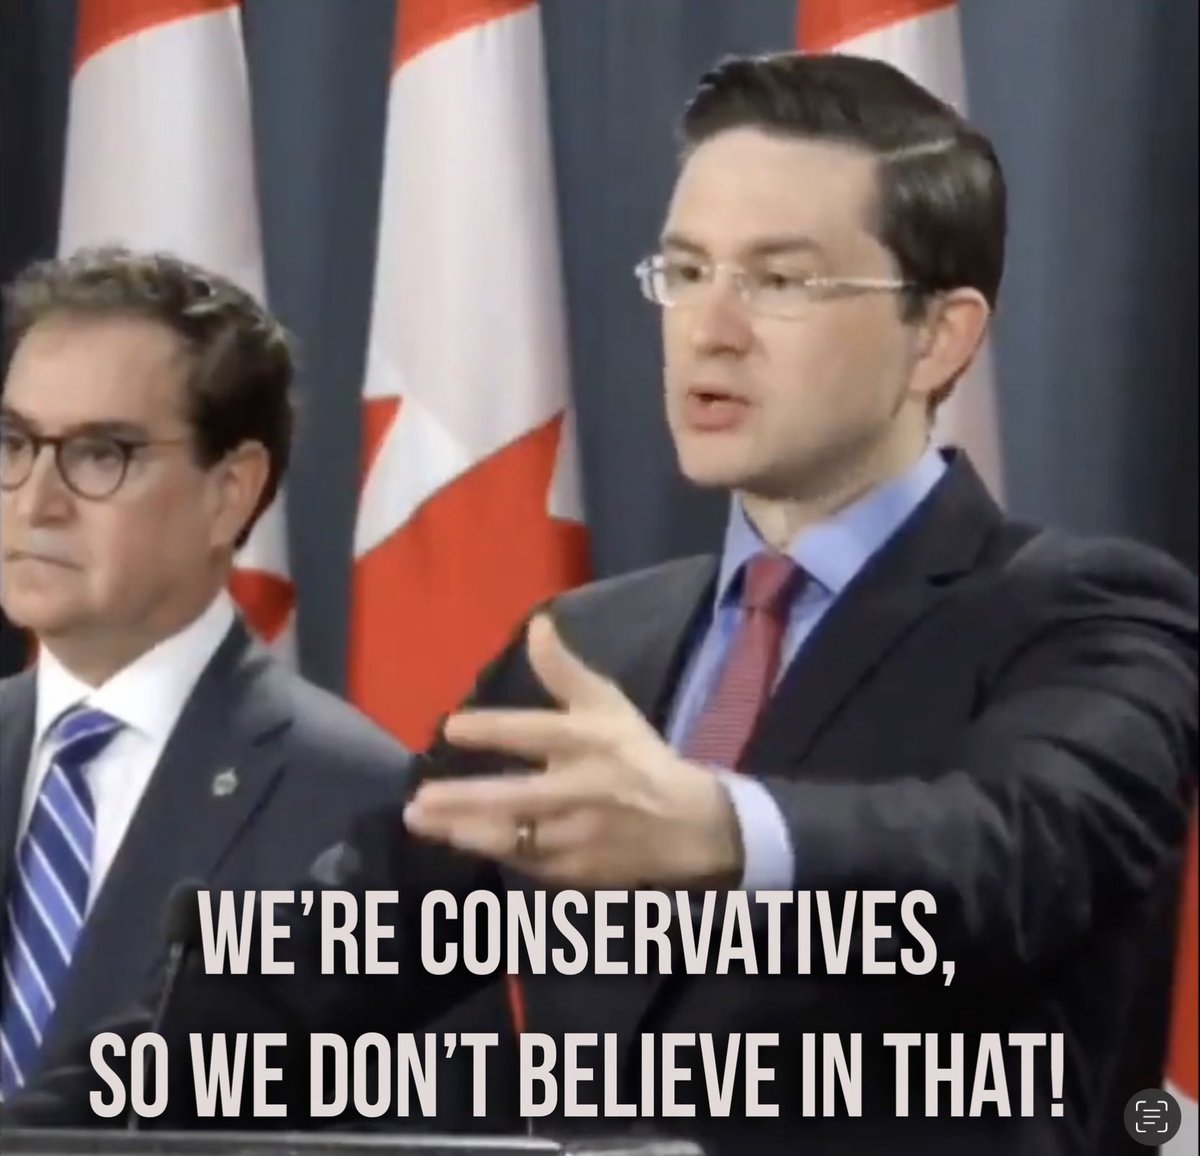 Poilievre did say this. Conservatives don’t believe in helping Canadians. They believe in power, privatization, trickle down bullshit, less rights for all and no social programs. They don’t even care about feeding hungry kids because they voted against that too. 
Vote wisely.